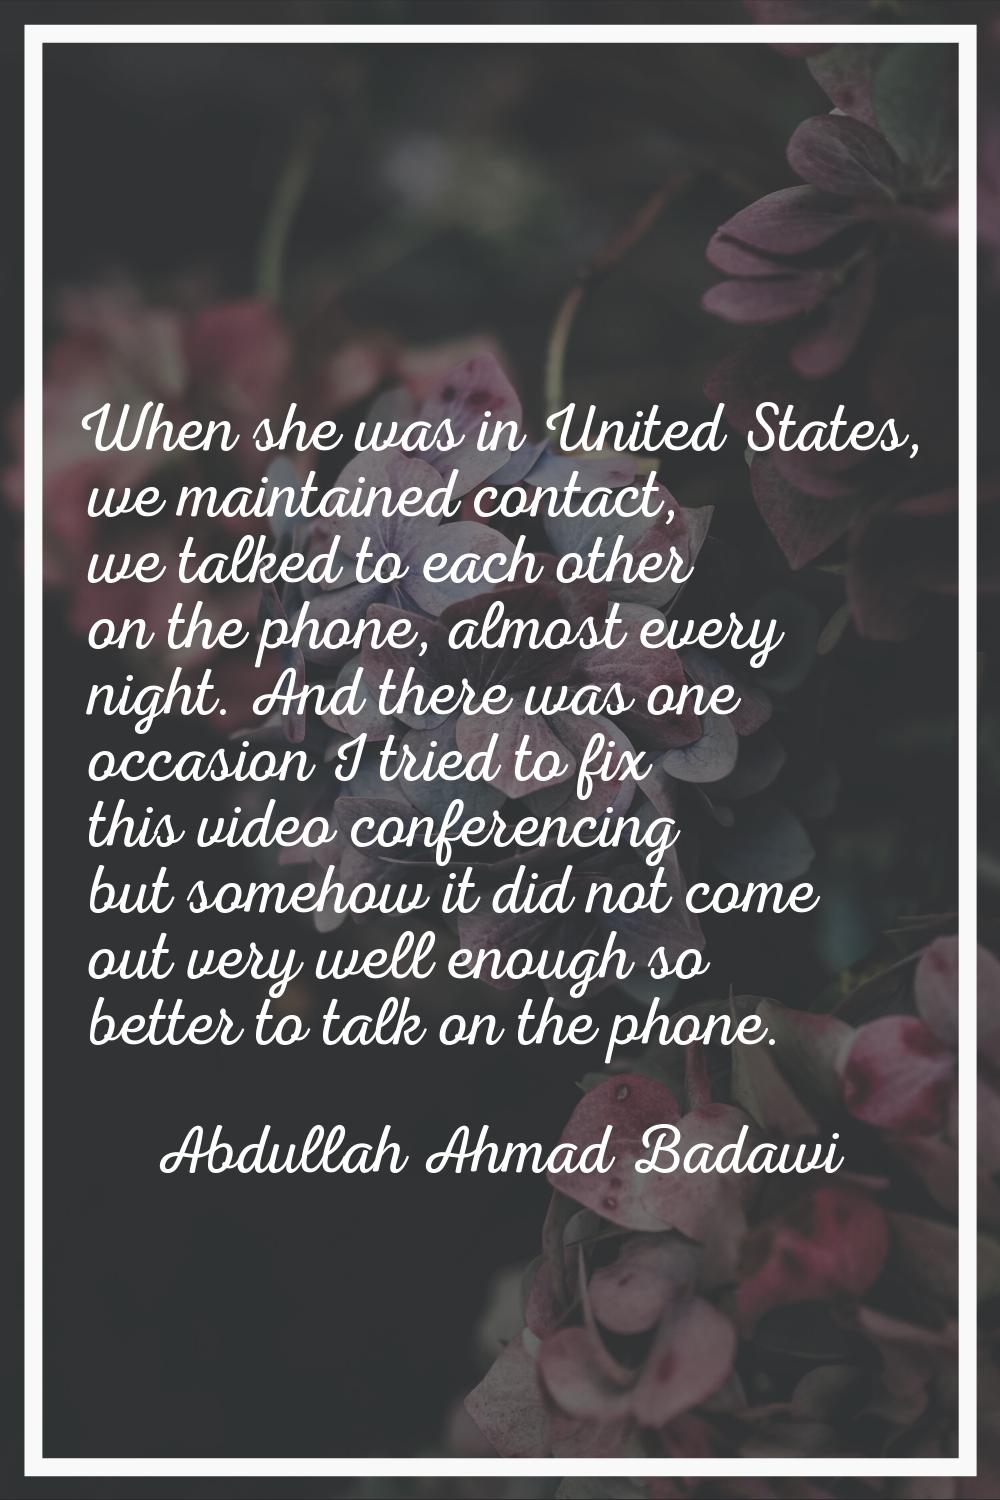 When she was in United States, we maintained contact, we talked to each other on the phone, almost 